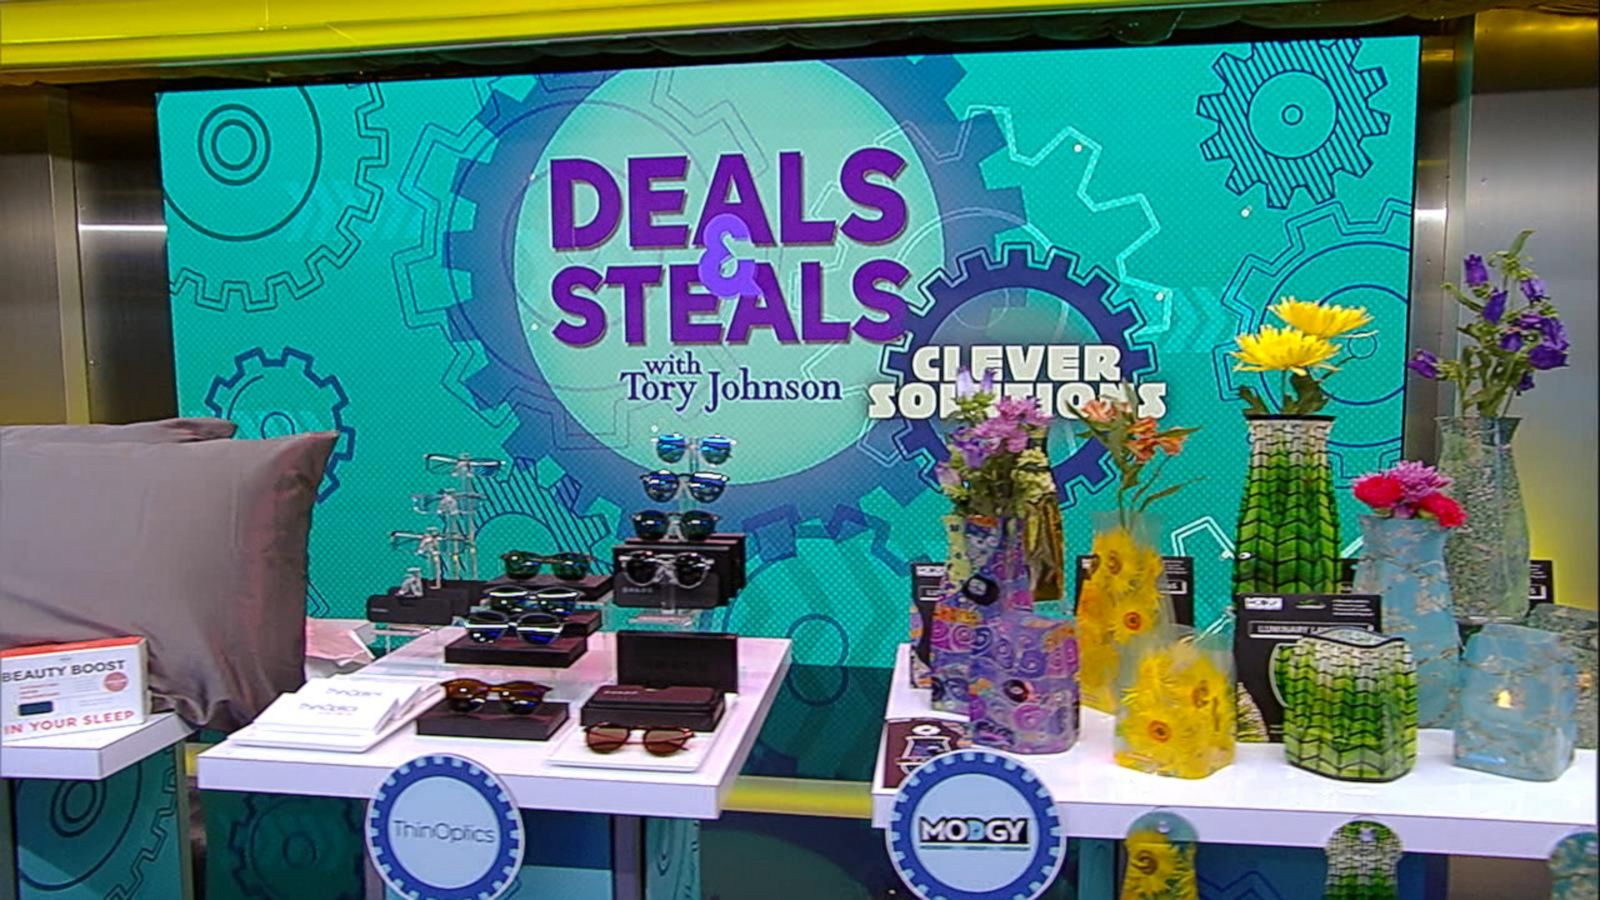 'GMA' Deals and Steals for clever, everyday solutions Good Morning